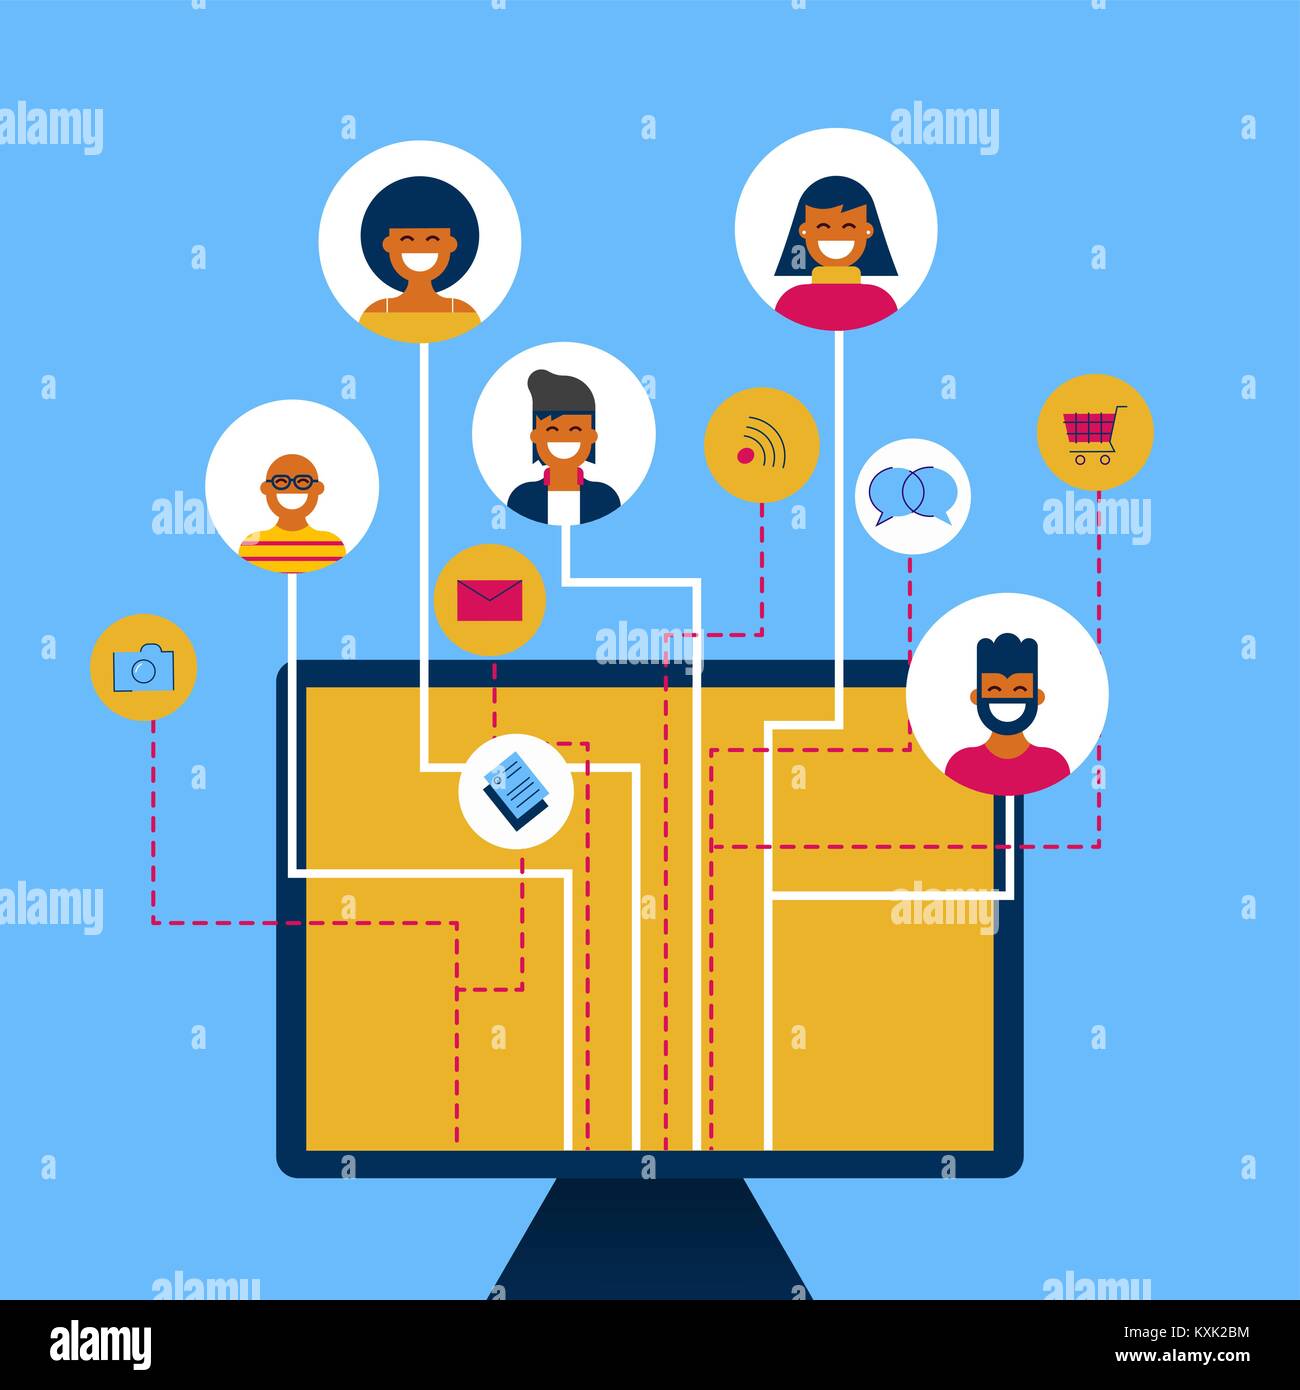 Computer connected on social media network with people group and online internet activities. Includes mail message, photo, gps icon. EPS10 vector. Stock Vector